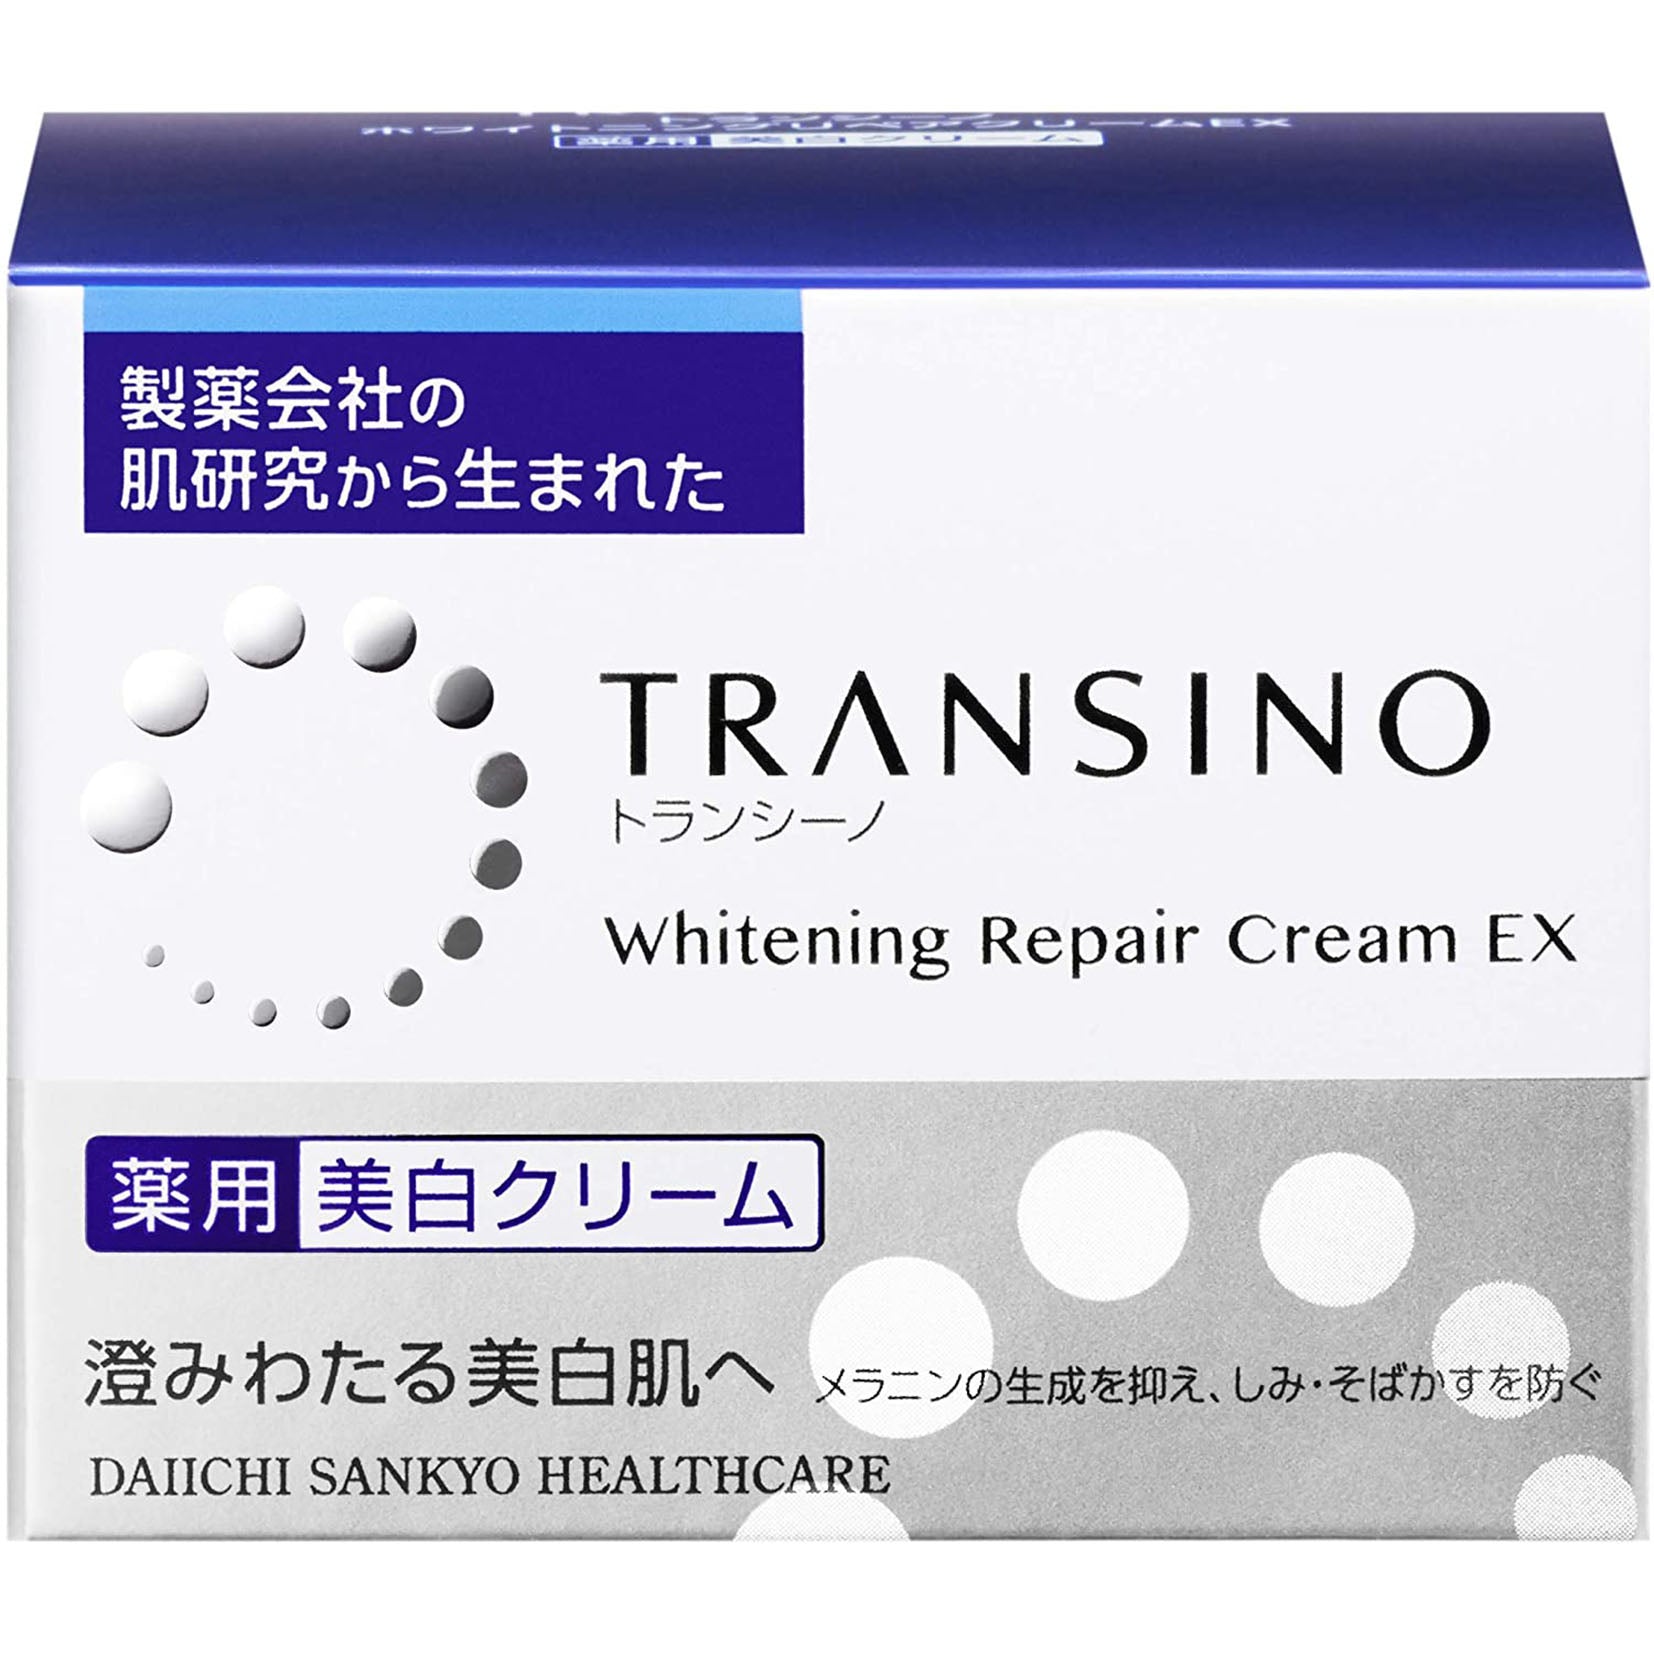 Transino Medicinal Whitening Repair Cream EX 35g - Harajuku Culture Japan - Japanease Products Store Beauty and Stationery